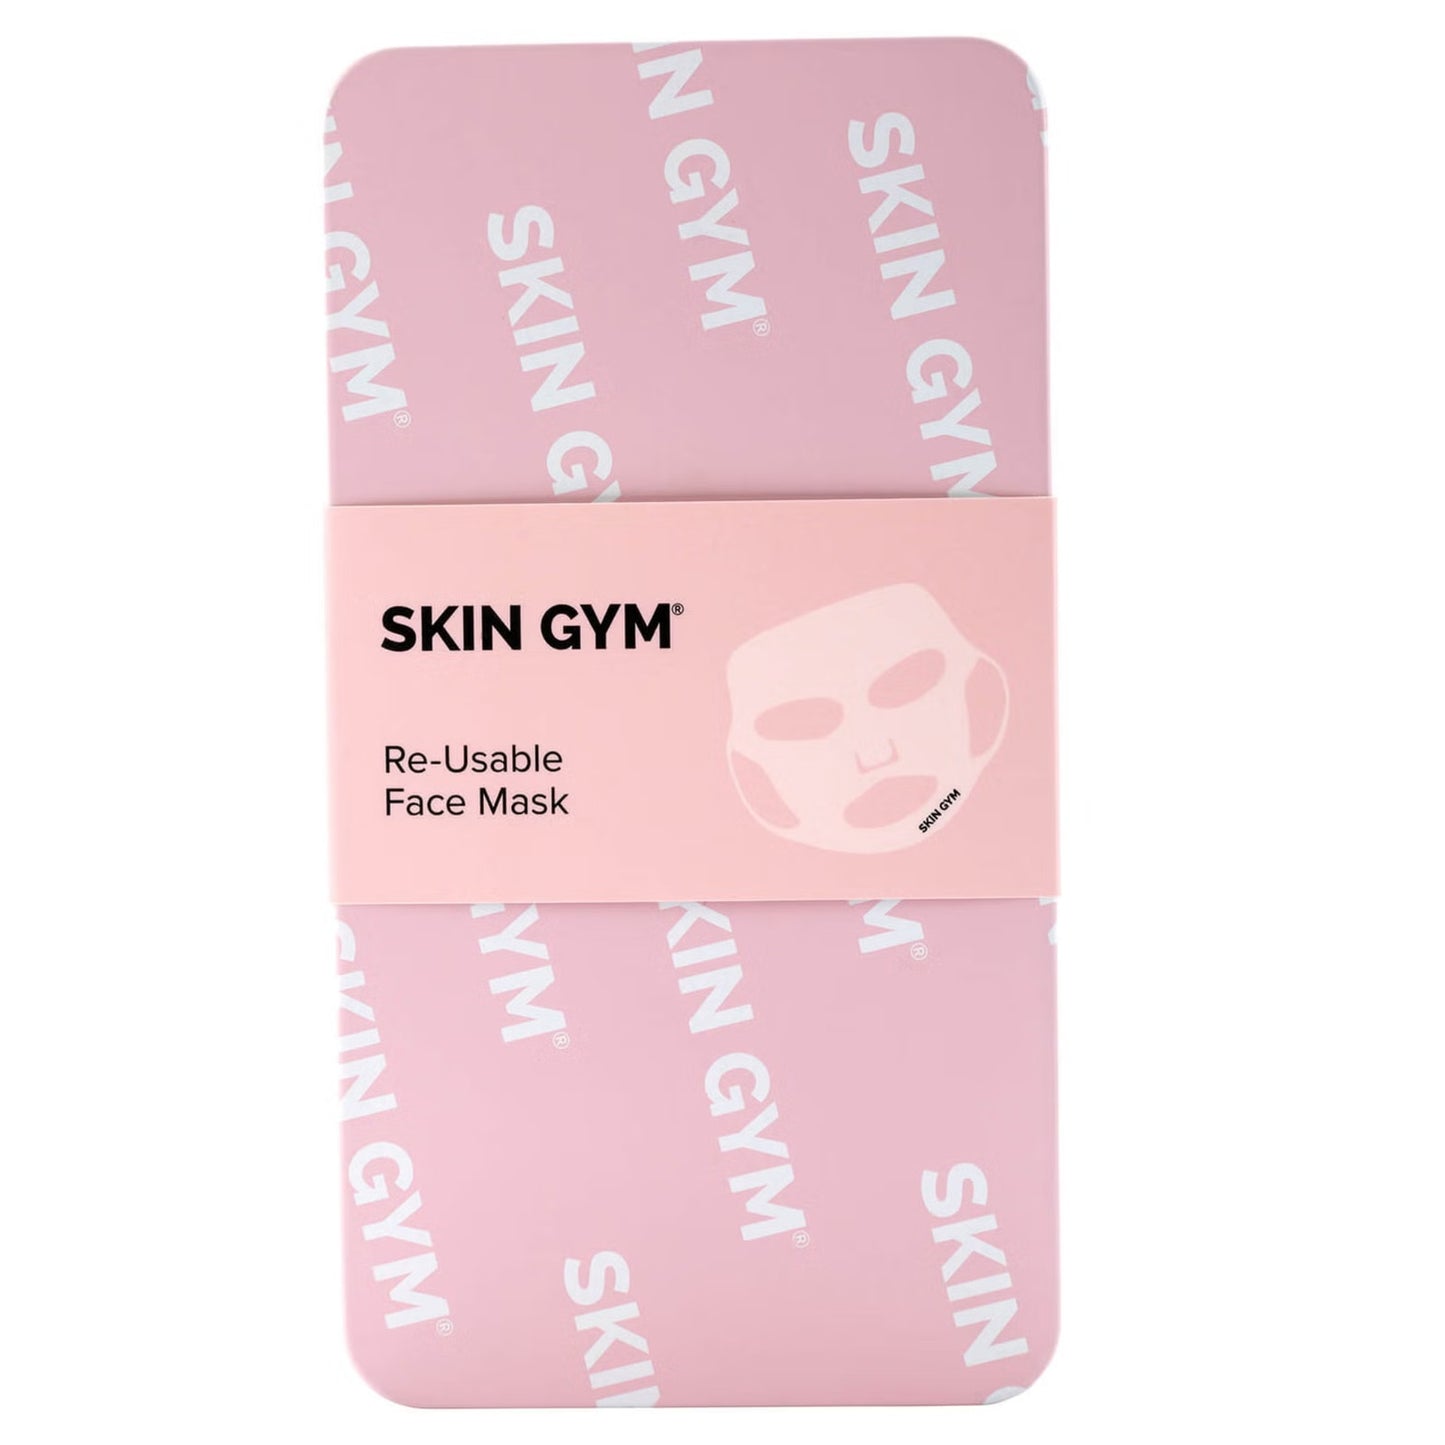 Skin Gym Re-Usable Mask Pack New in Package